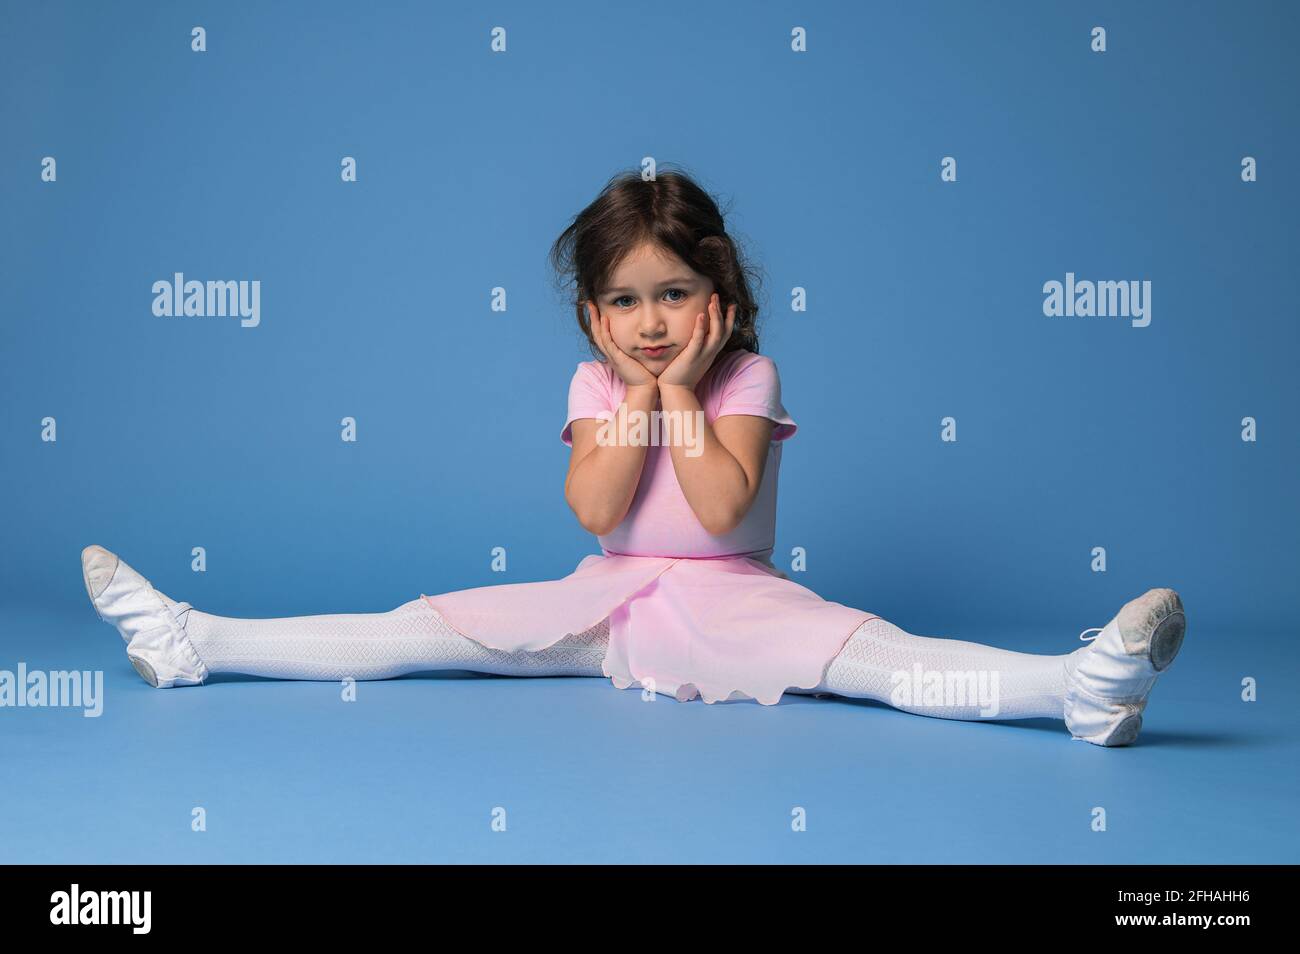 Cute ballerina in pink dress perfecting twine while sitting on blue background with copy space Stock Photo